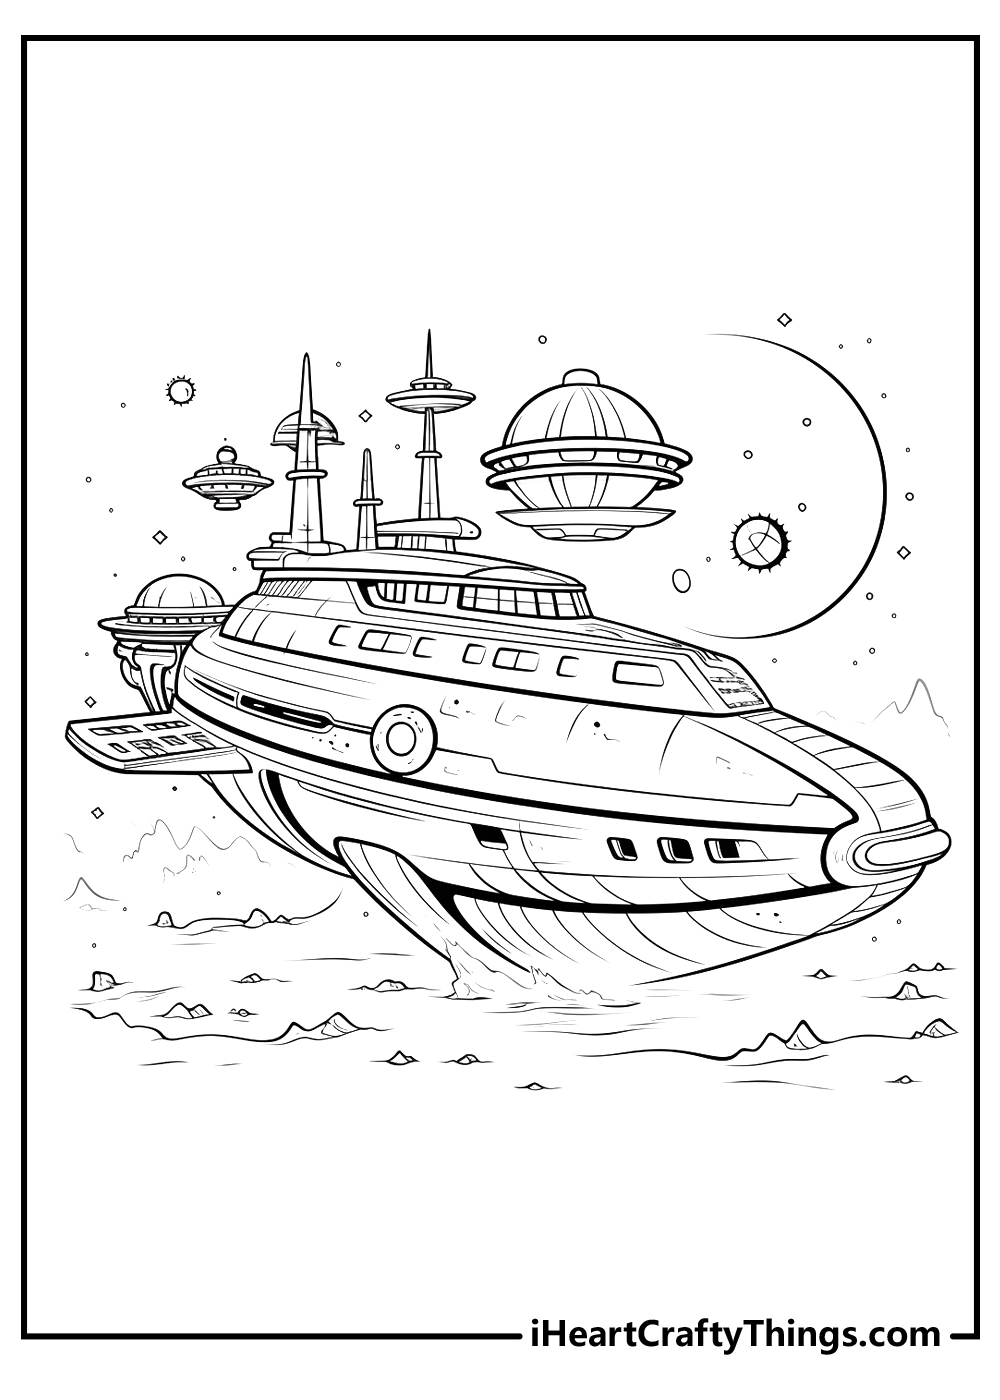 spaceship coloring pages for adults